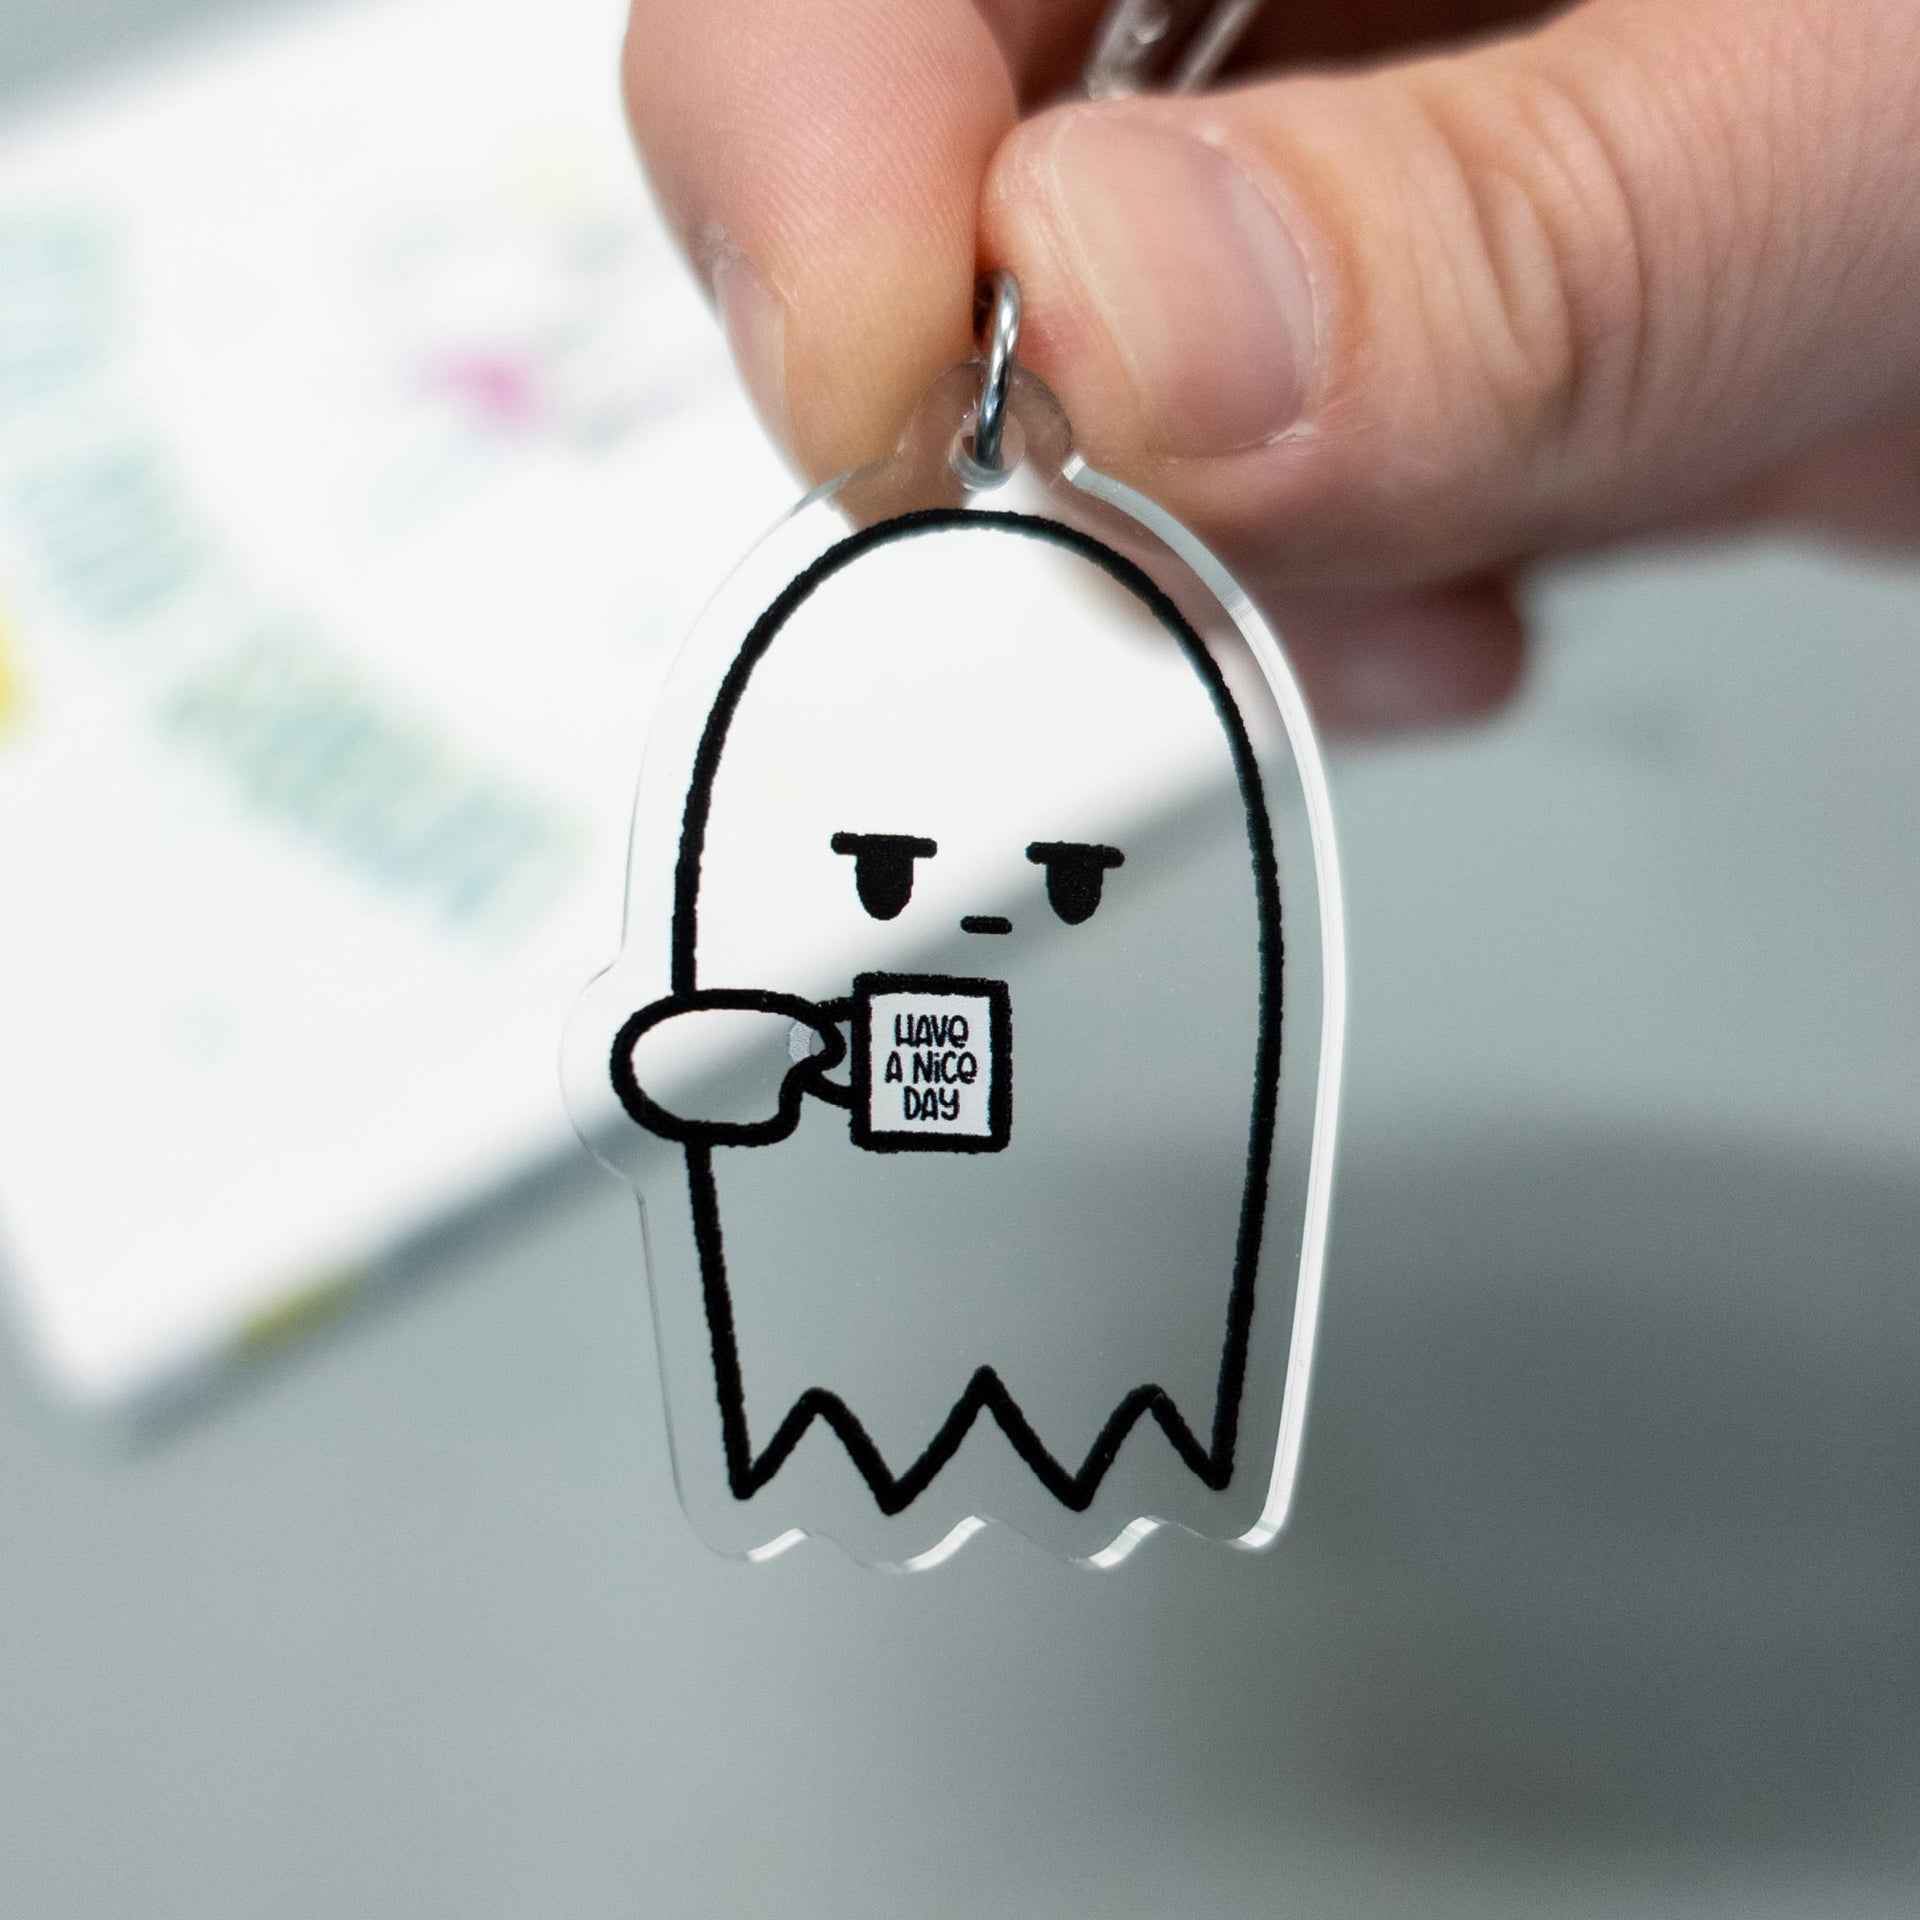 grumpy ghost keychain hanging from hand